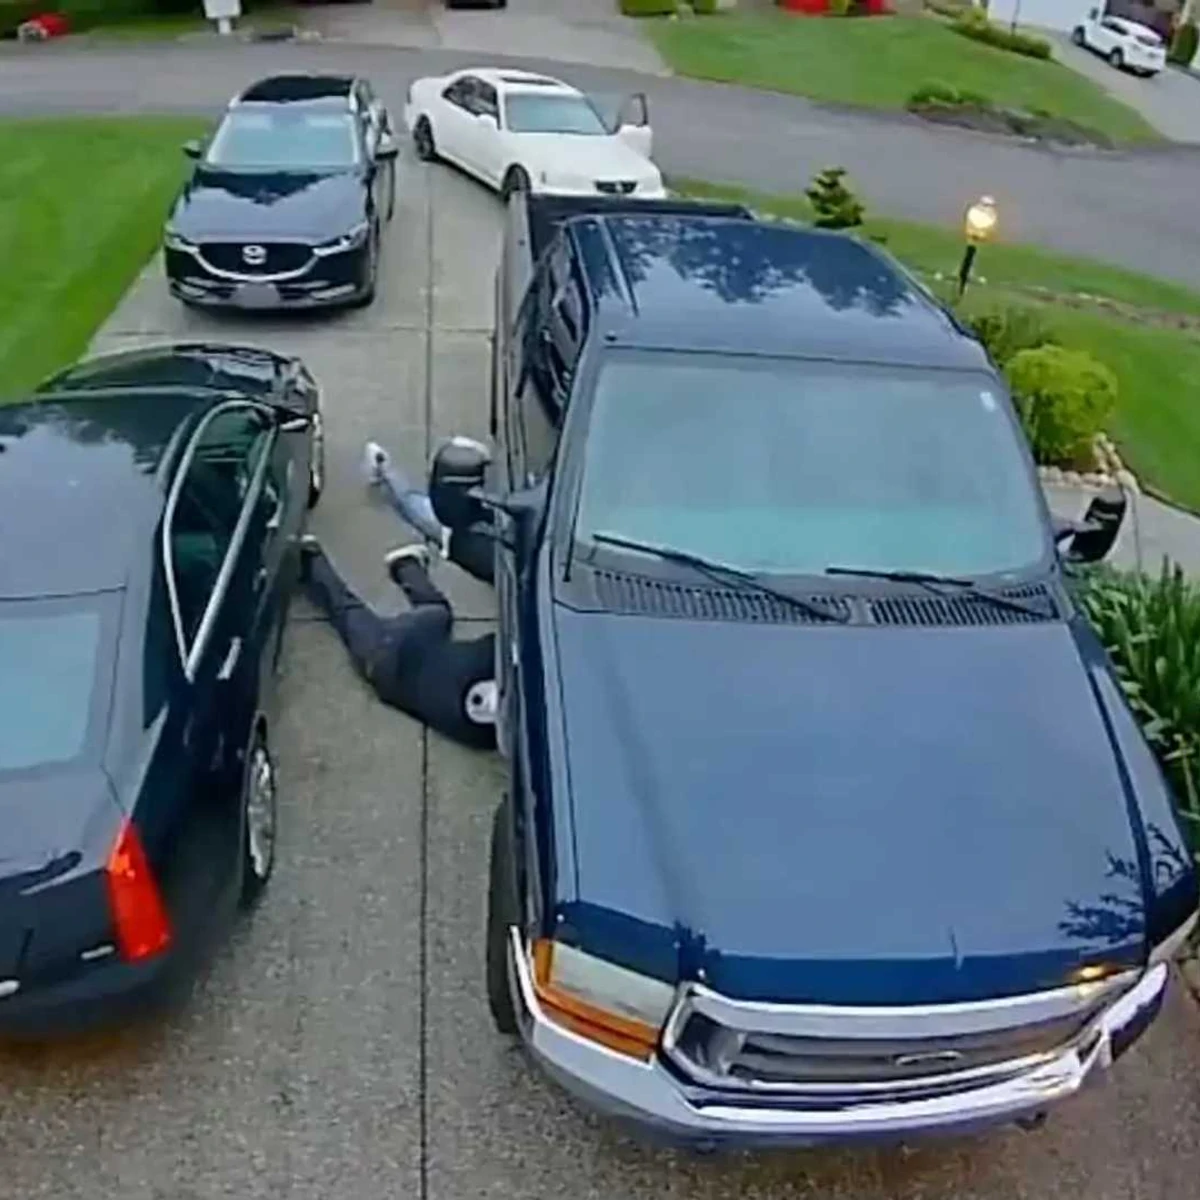 You'd be surprised at how quickly thieves can steal your car's catalytic converter.